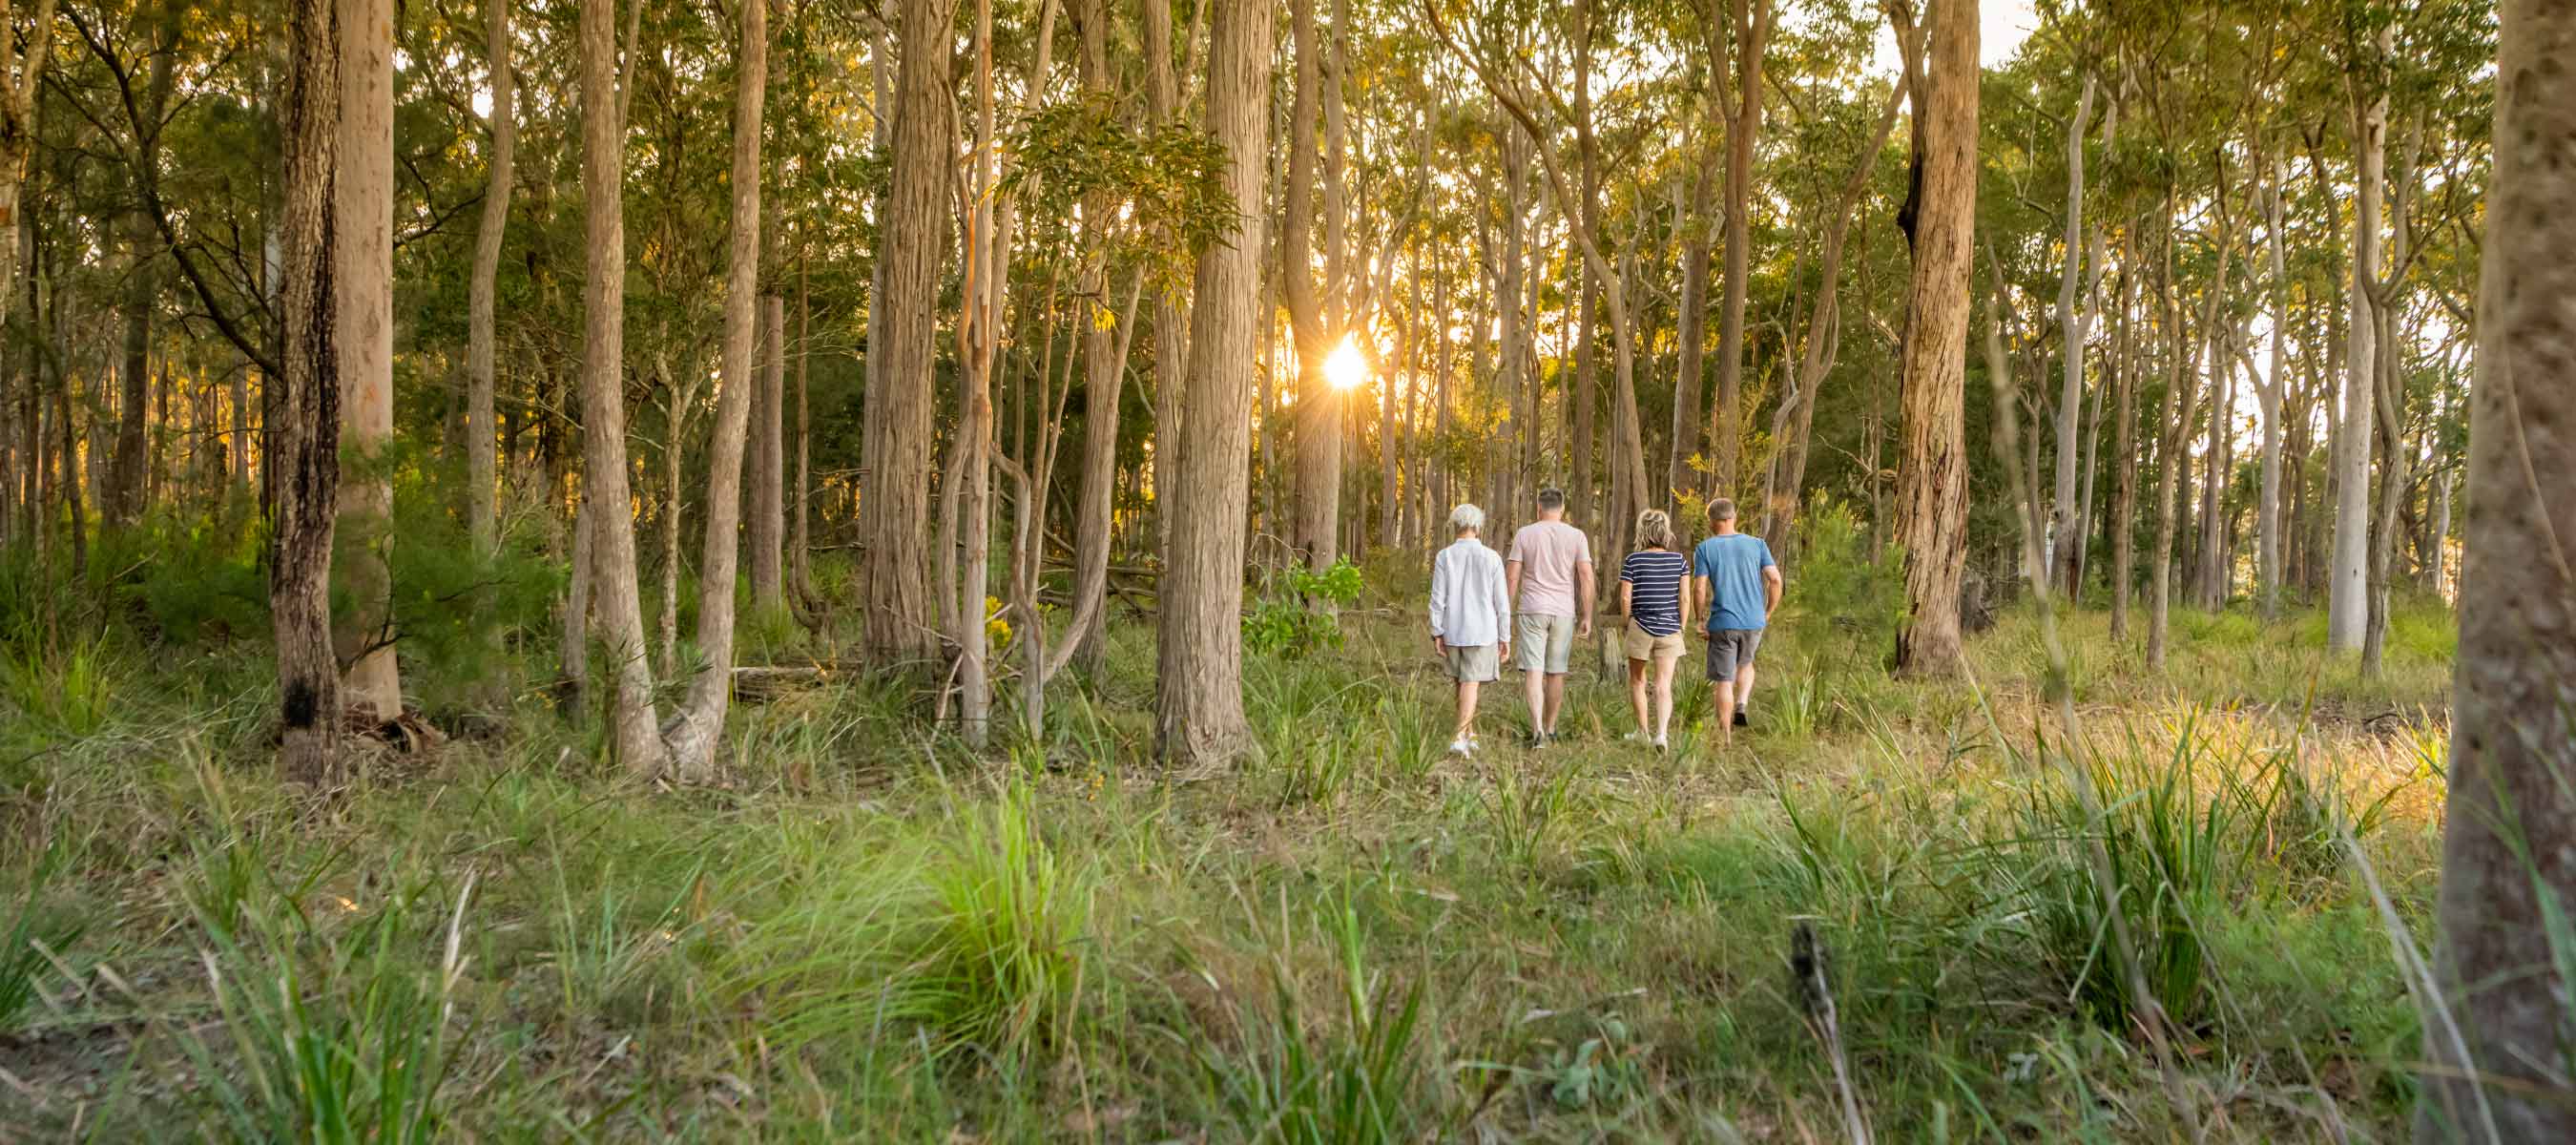 Blueheath residents walking through forest in Medowie Port Stephens Newcastle